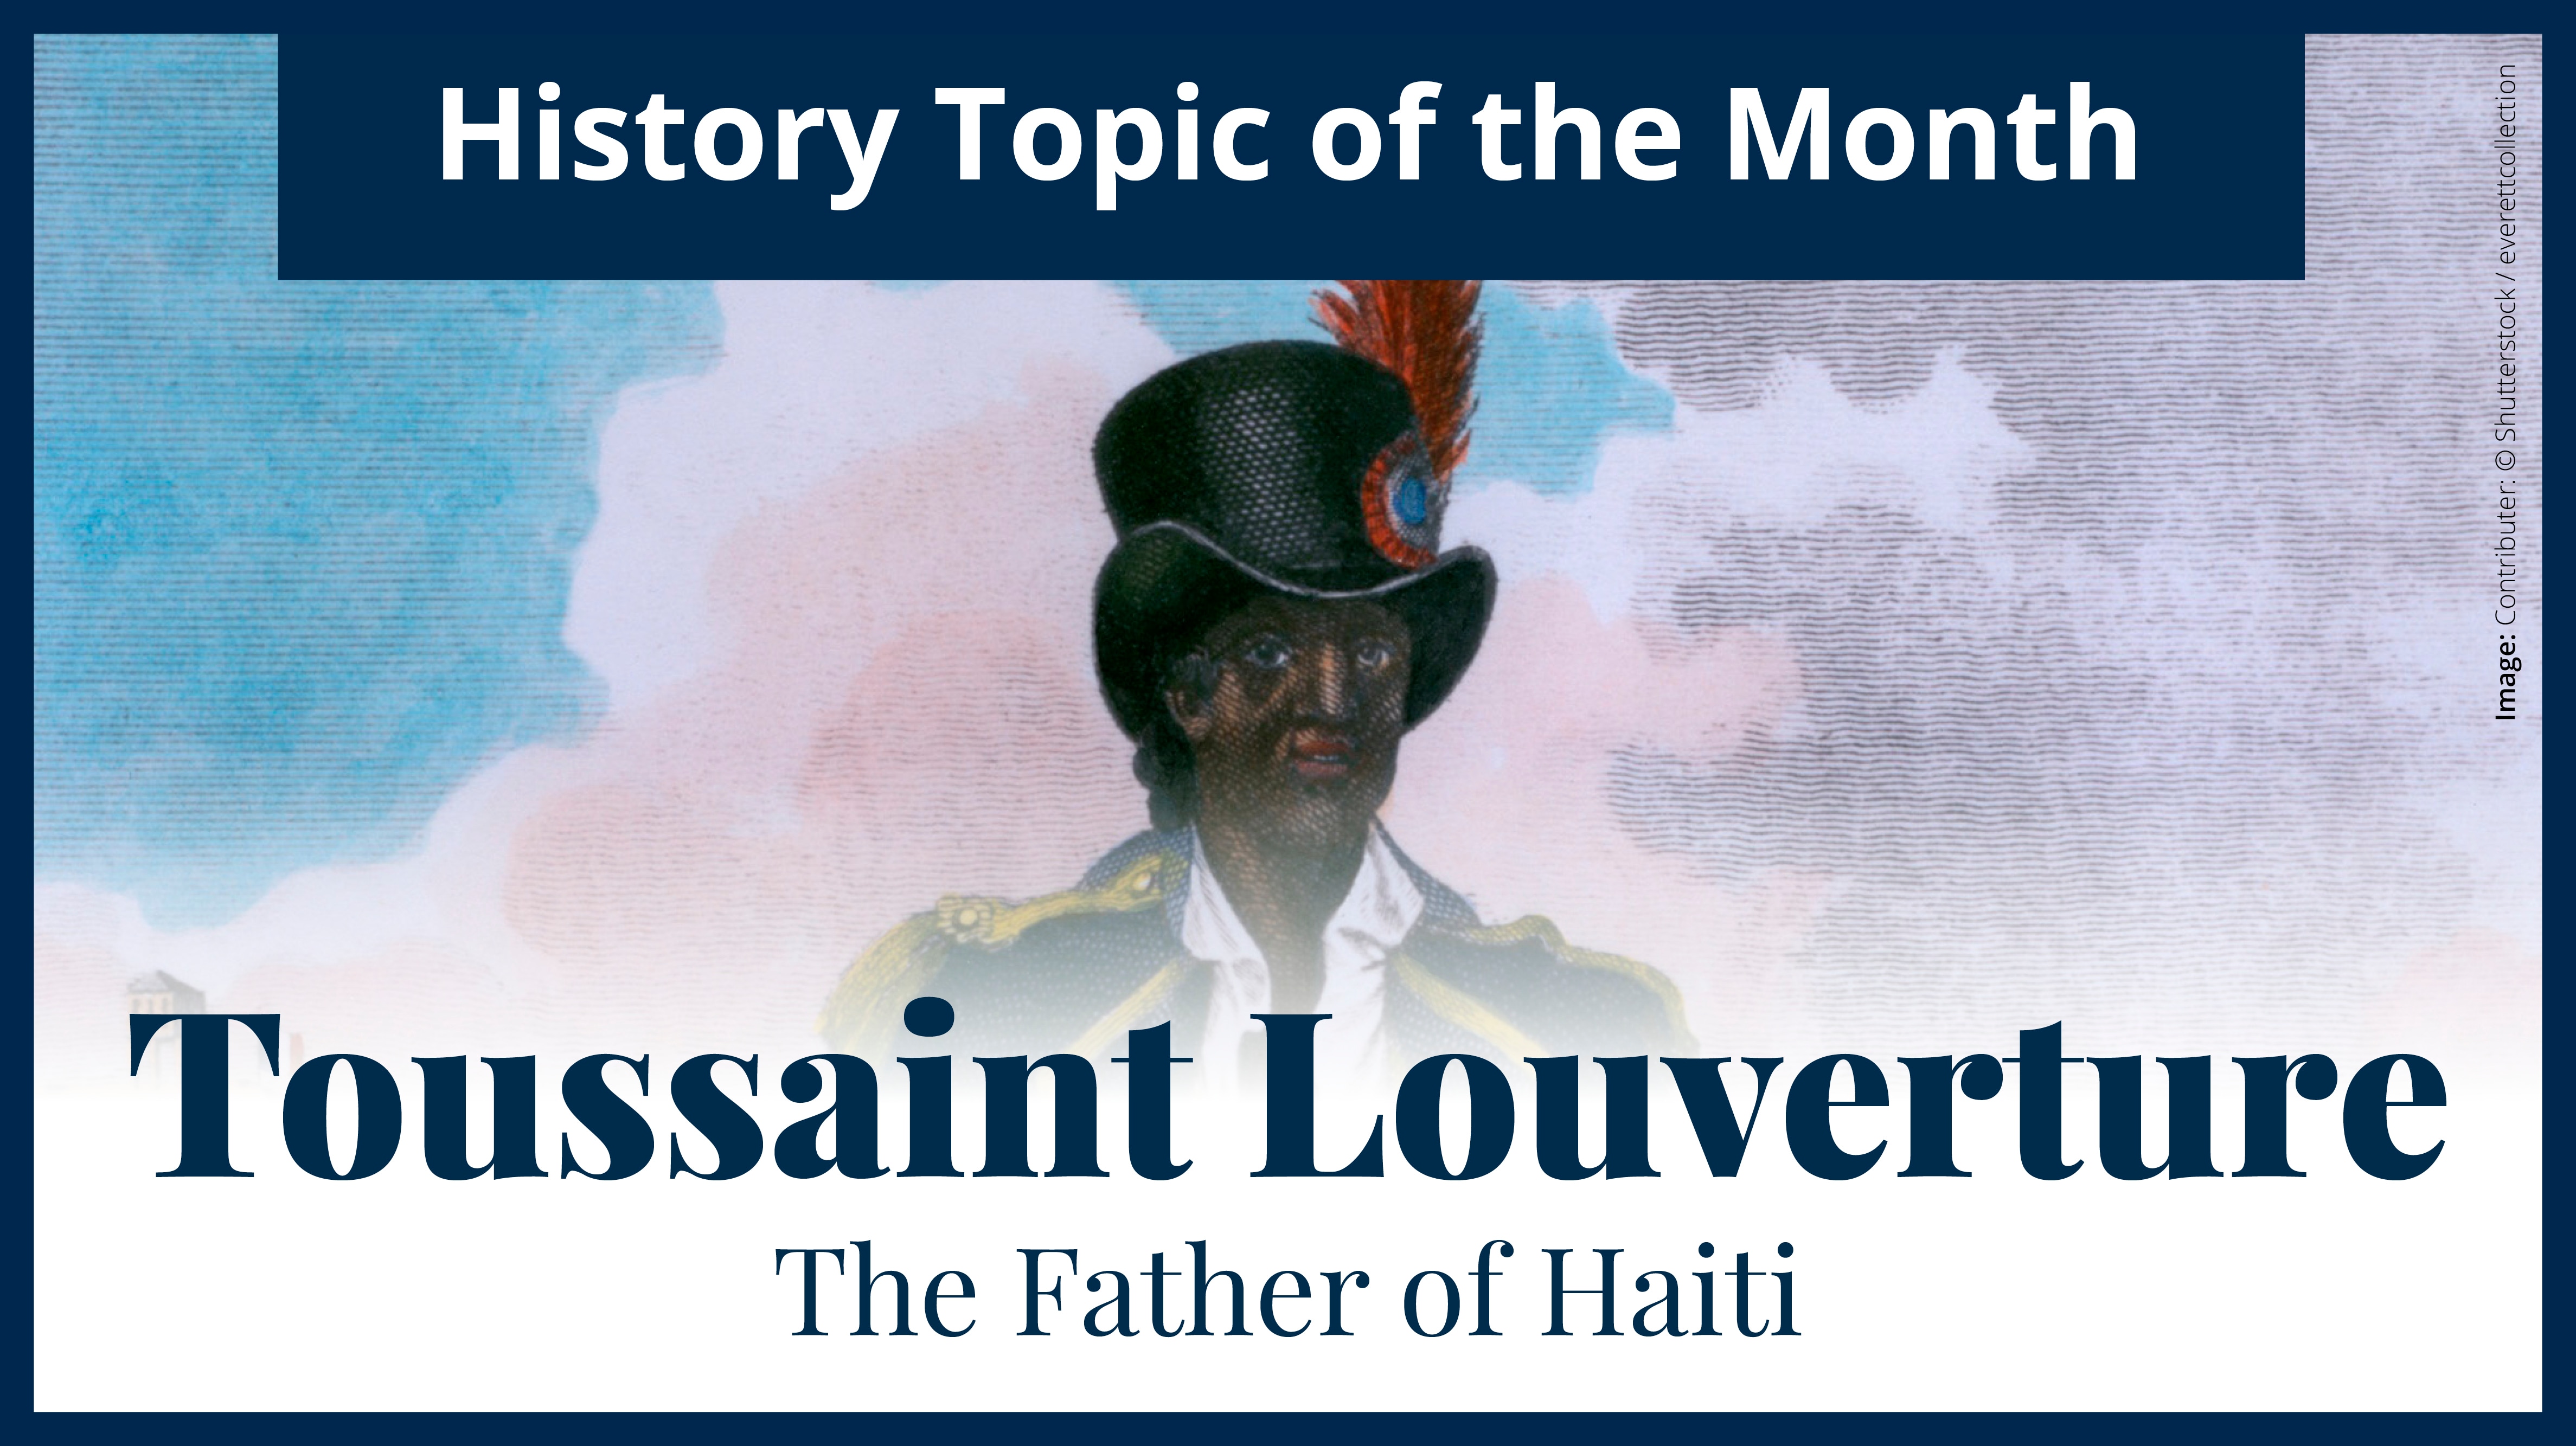 History topic of the month: Toussaint Louverture